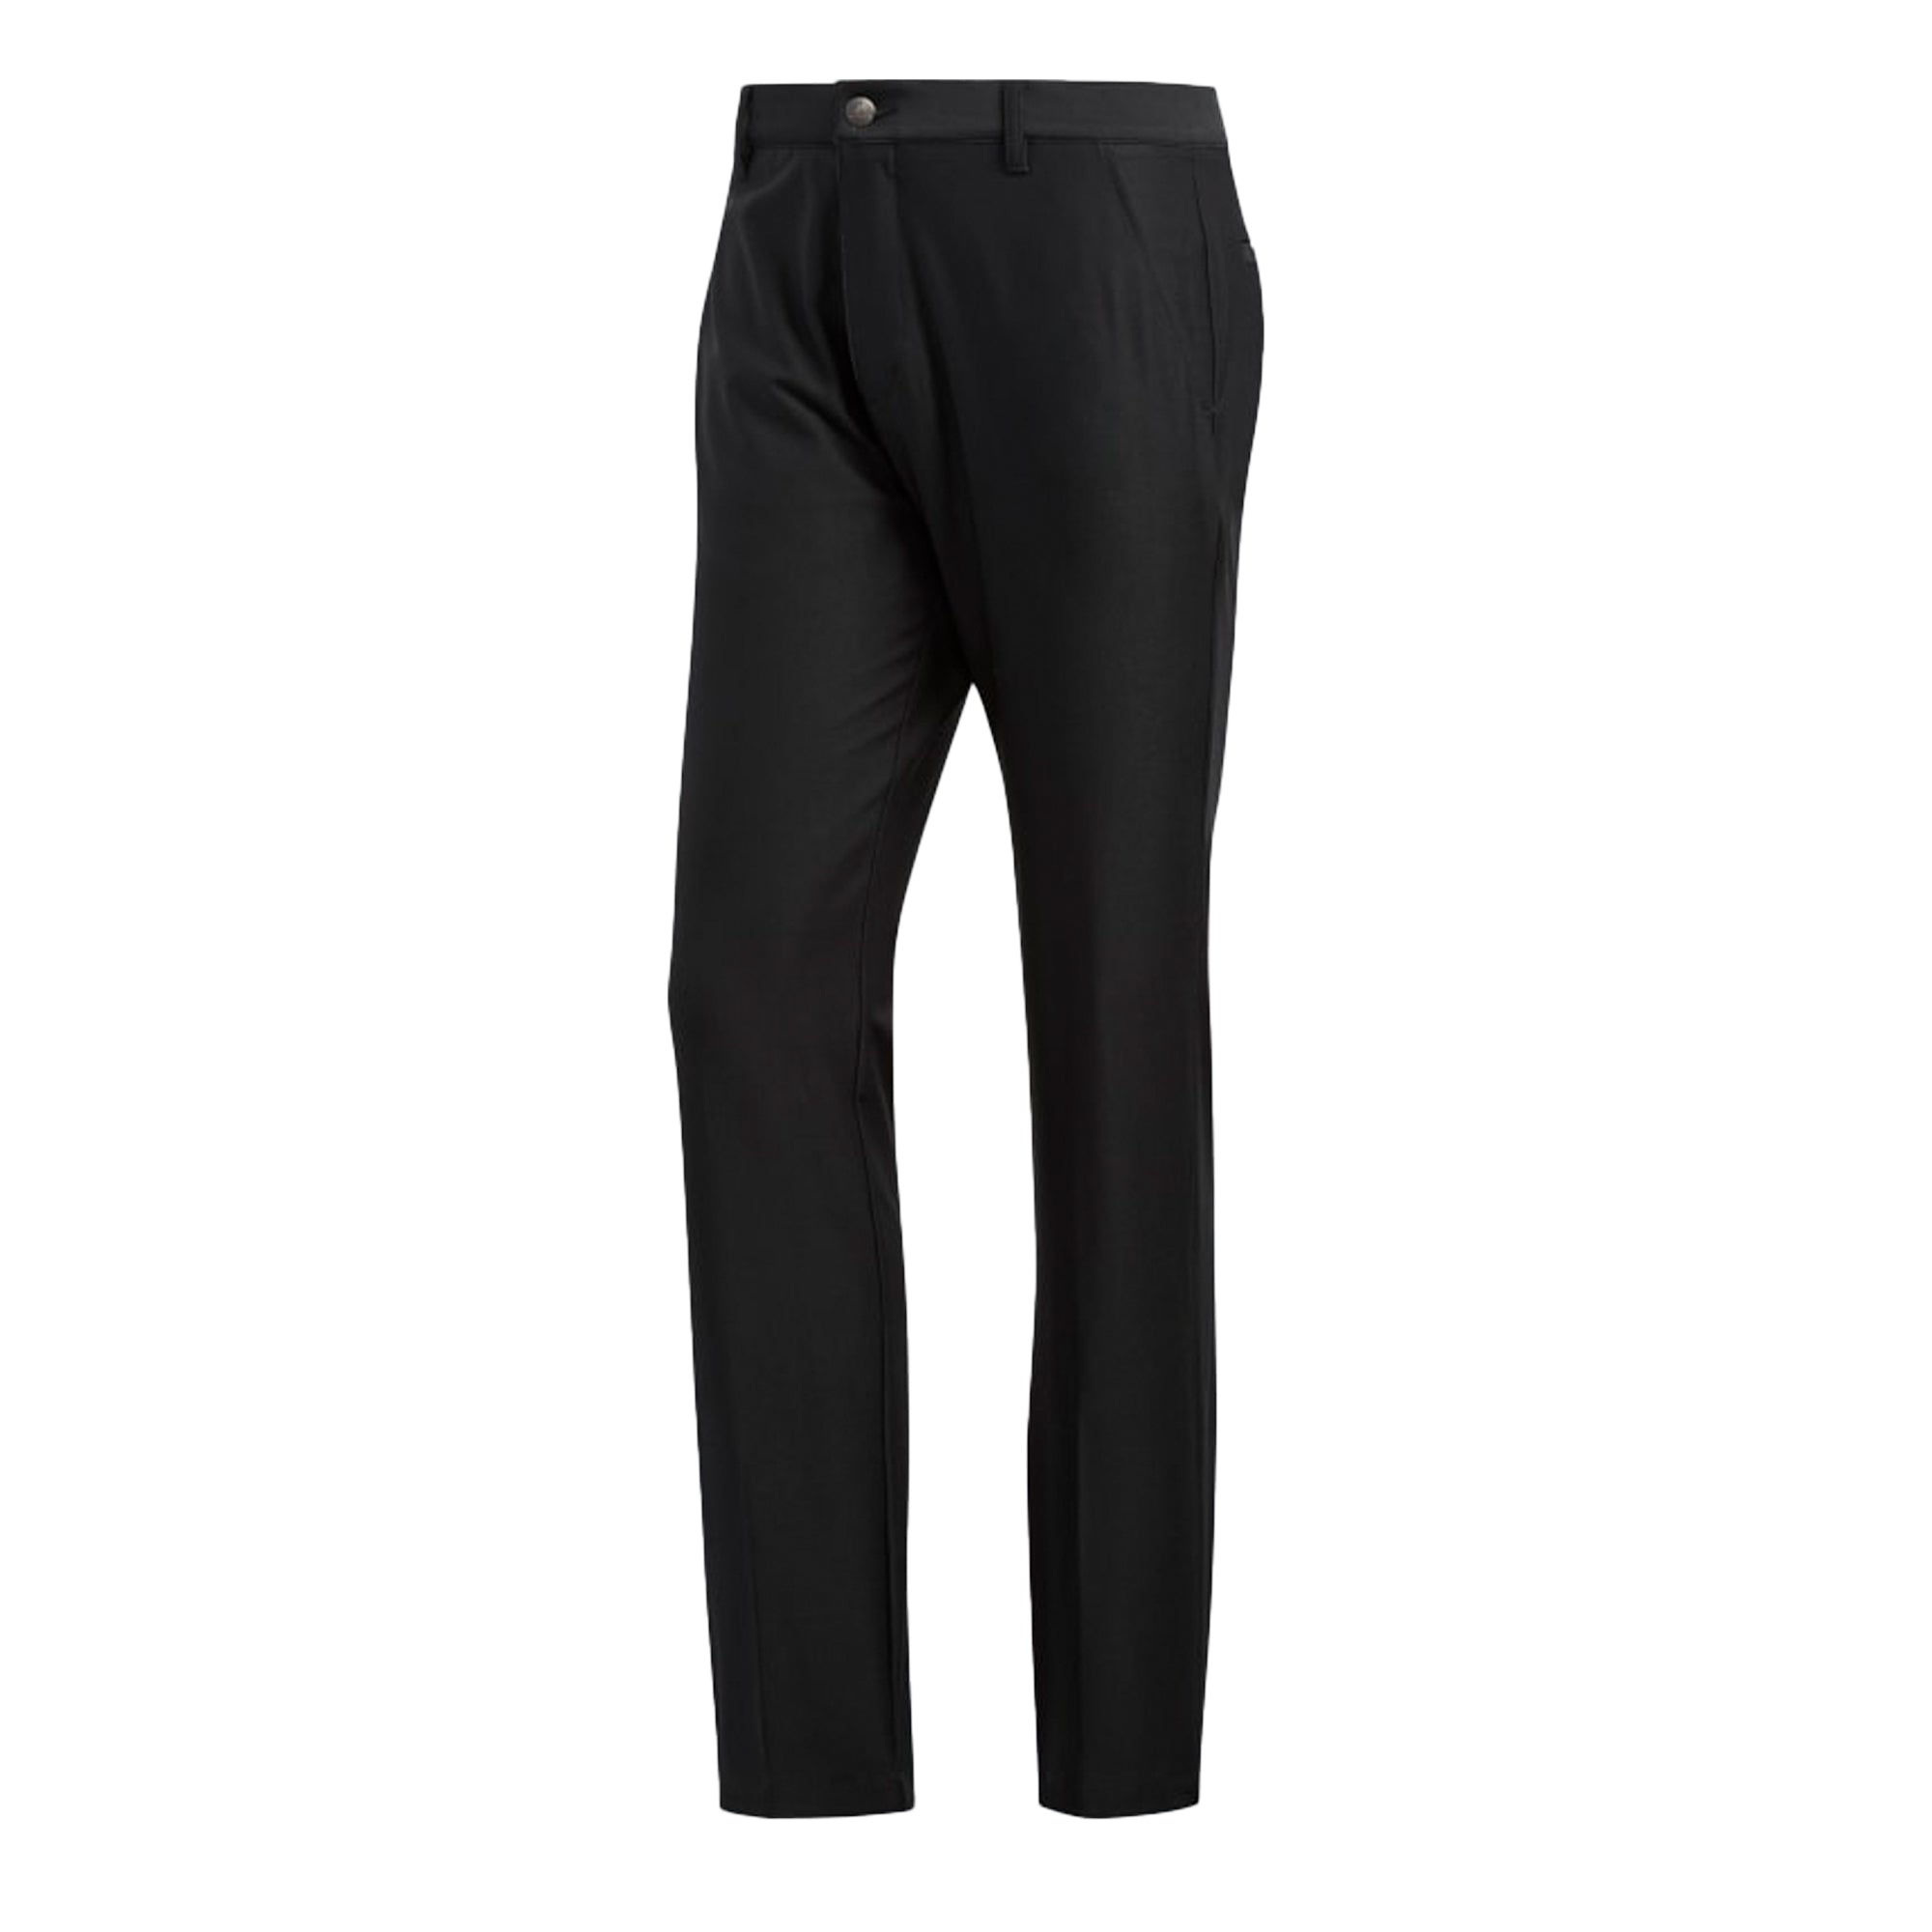 Buy adidas Formal Trousers online  Women  2 products  FASHIOLAin